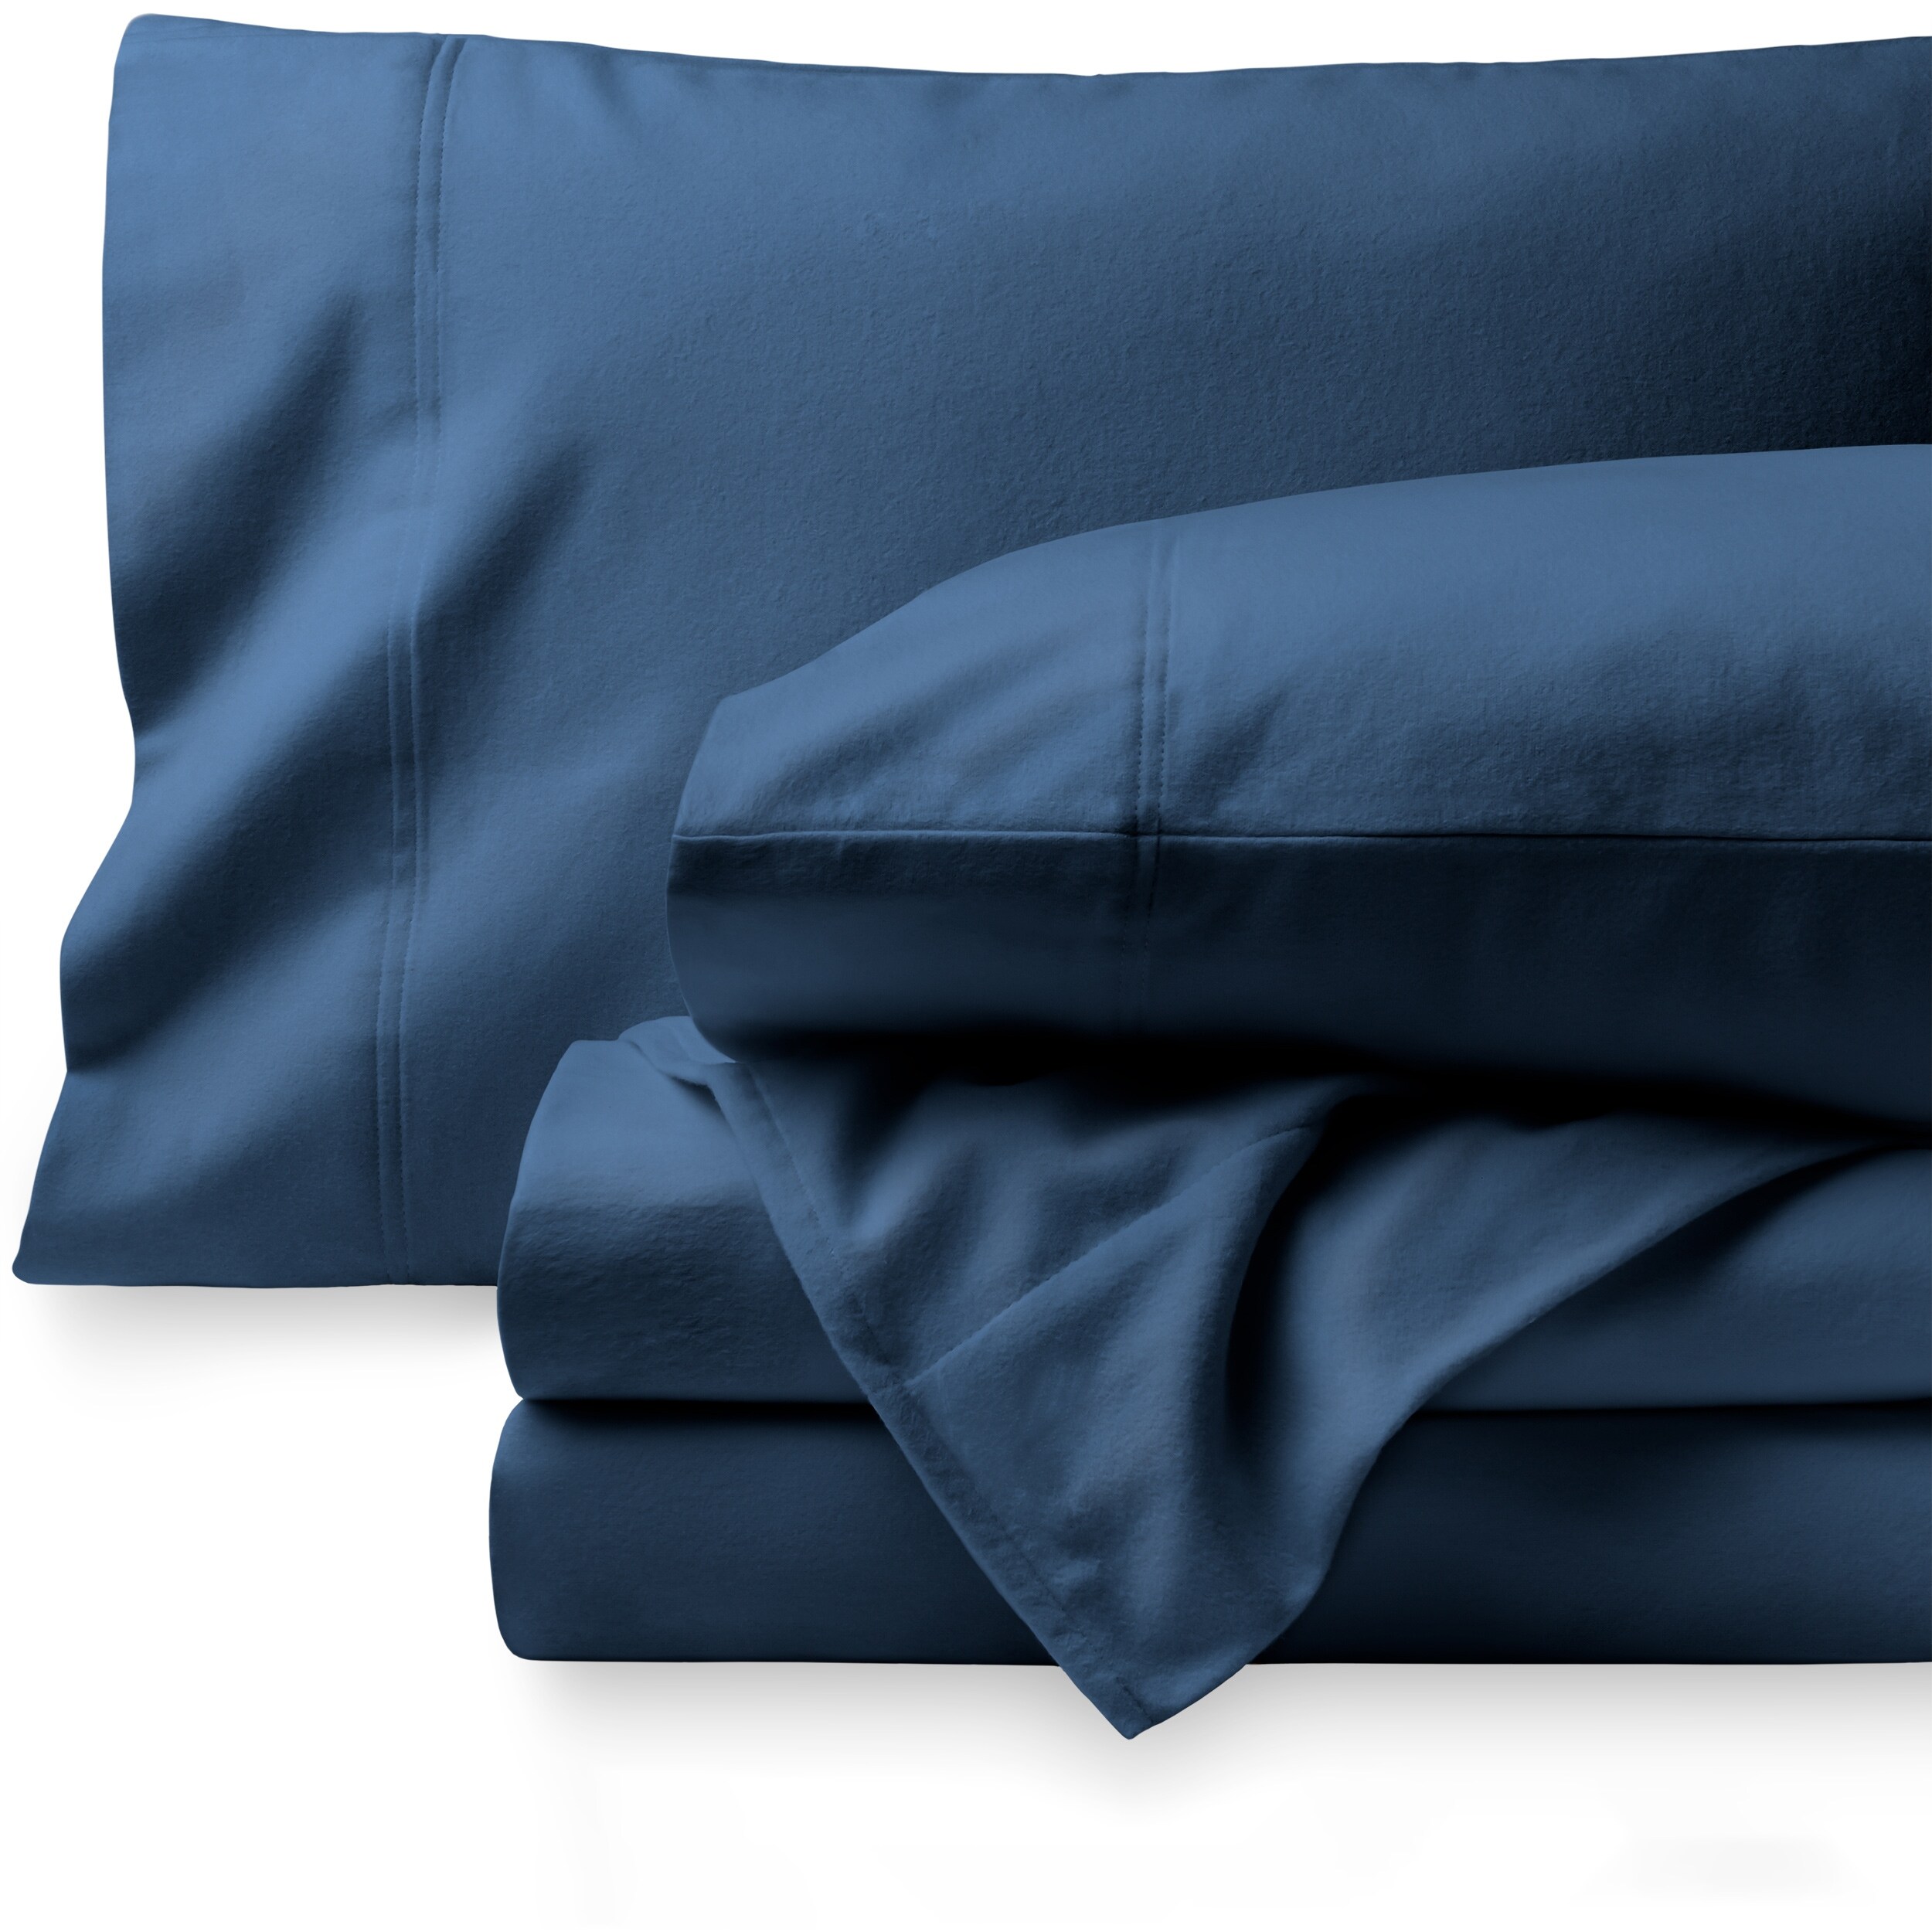 100% Egyptian Cotton Deep Pocket Flannel 4 Piece Bed Sheet Set Solid Colors